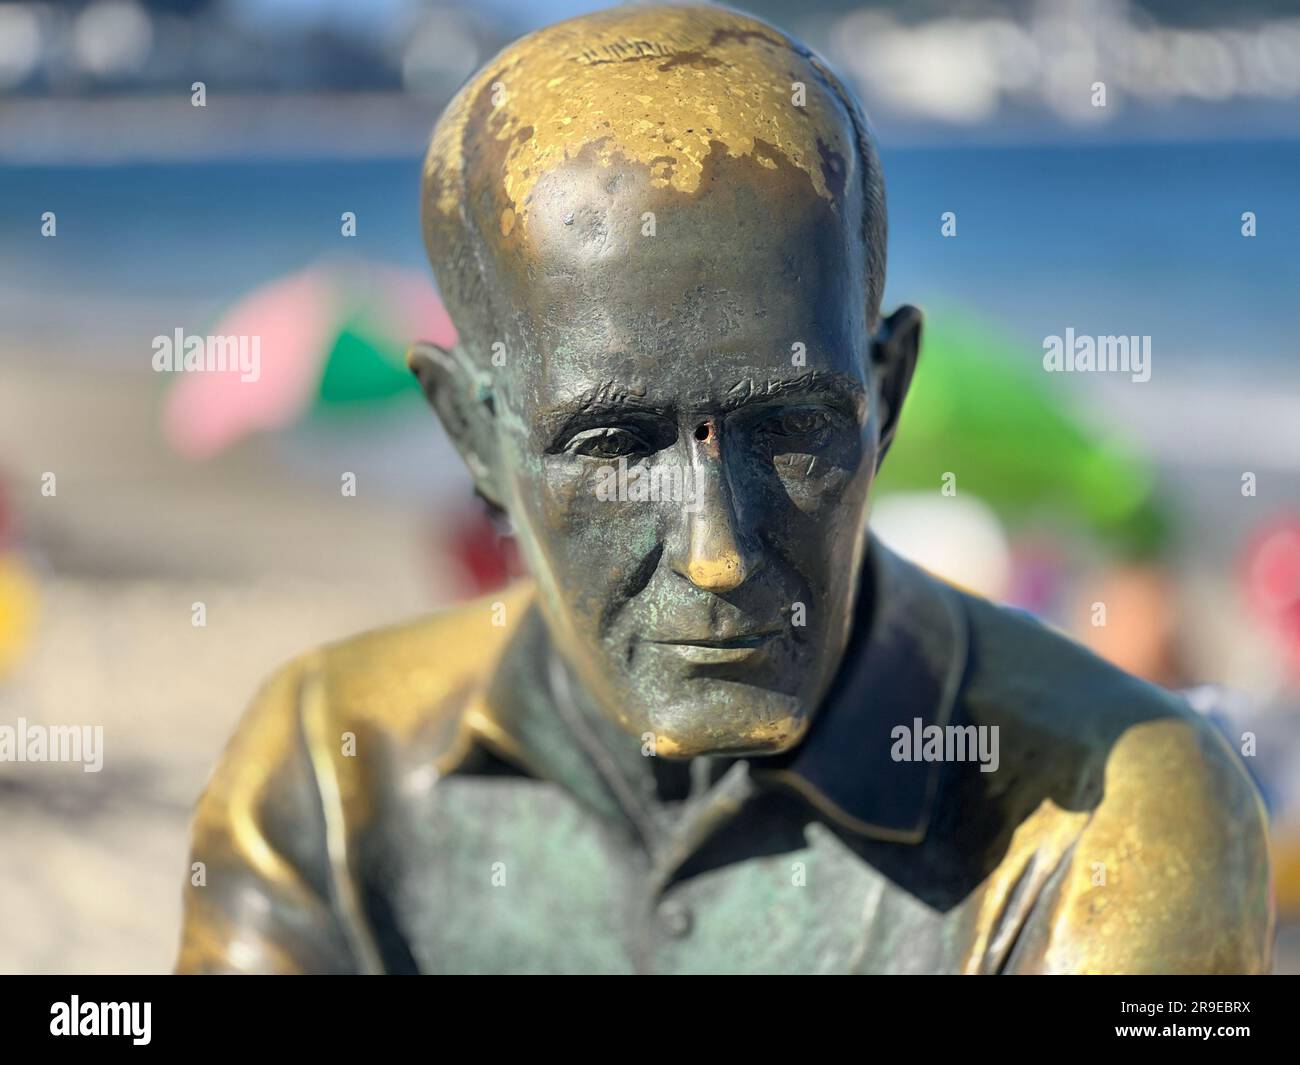 A statue of renowned Brazilian poet Carlos Drummond de Andrade near a picturesque beach in Brazil Stock Photo